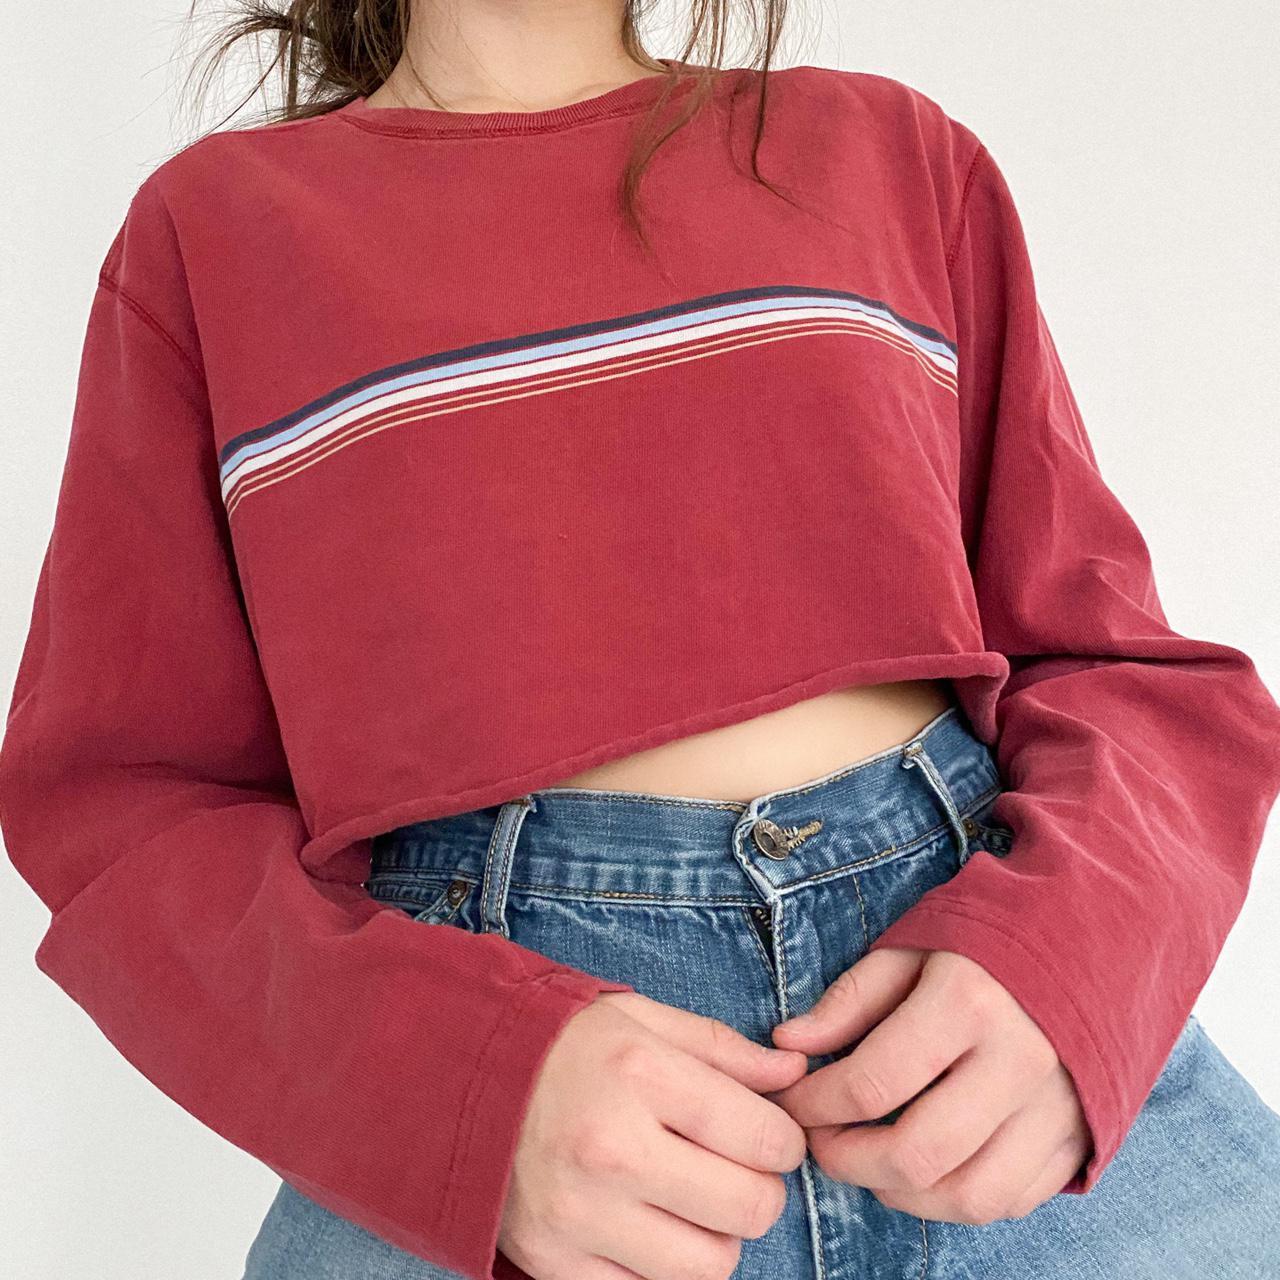 Old Navy Women's Red and Blue Crop-top (3)